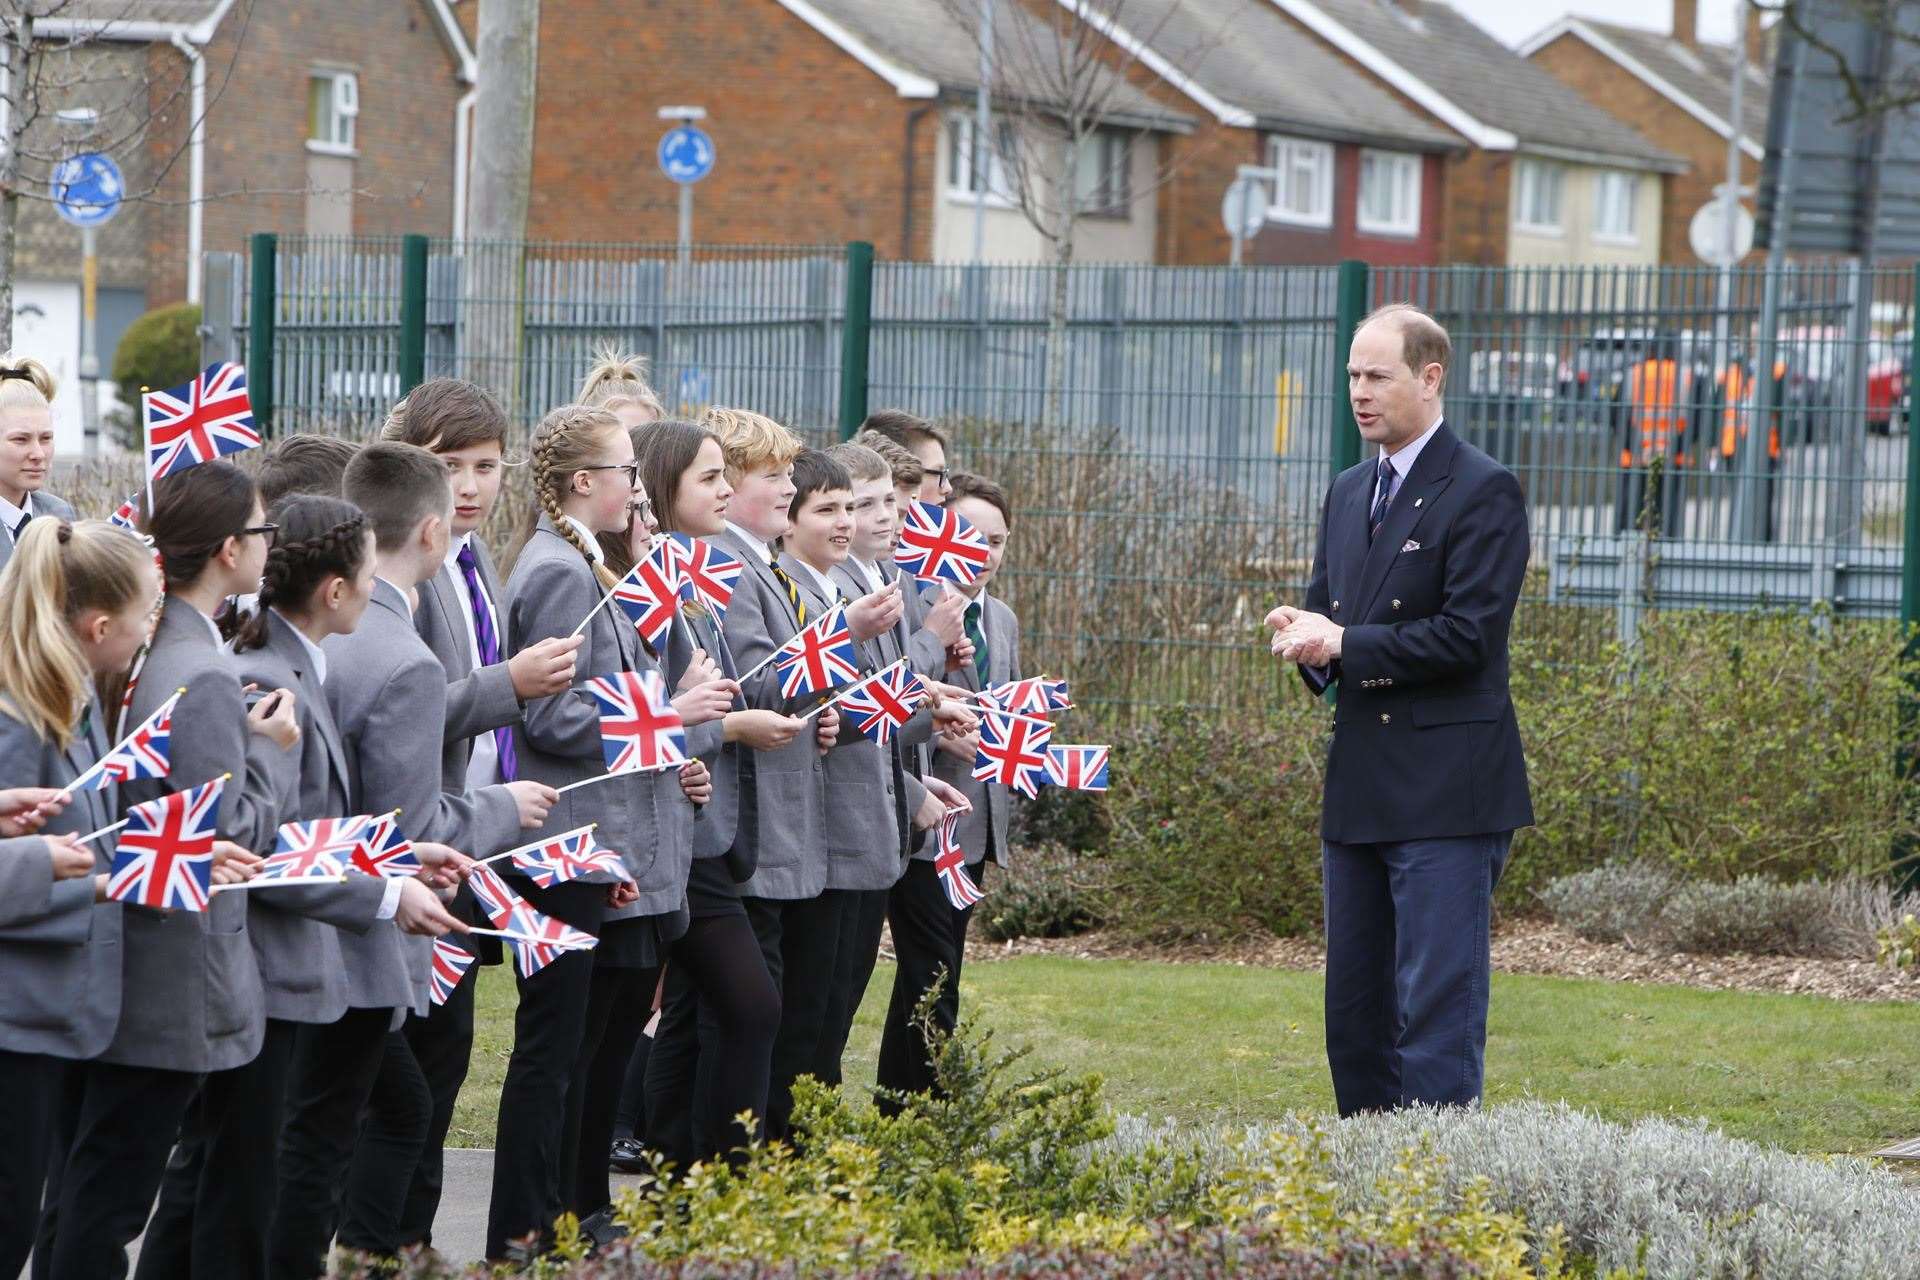 The Prince chats to pupils as soon as he arrives